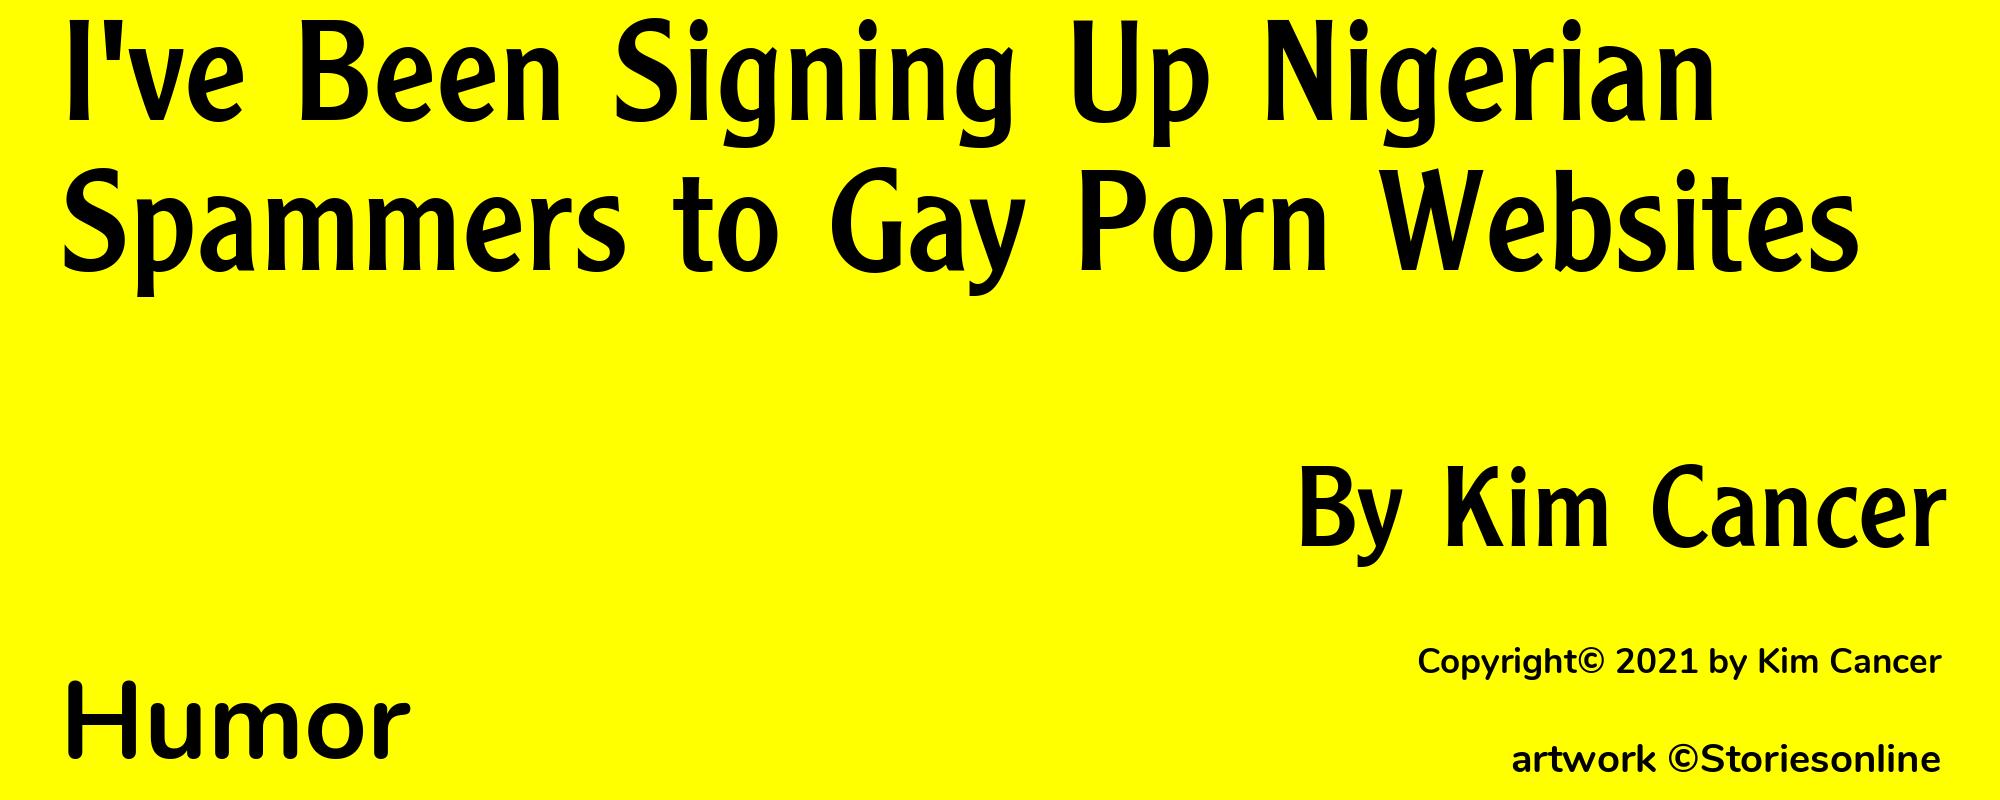 I've Been Signing Up Nigerian Spammers to Gay Porn Websites - Cover